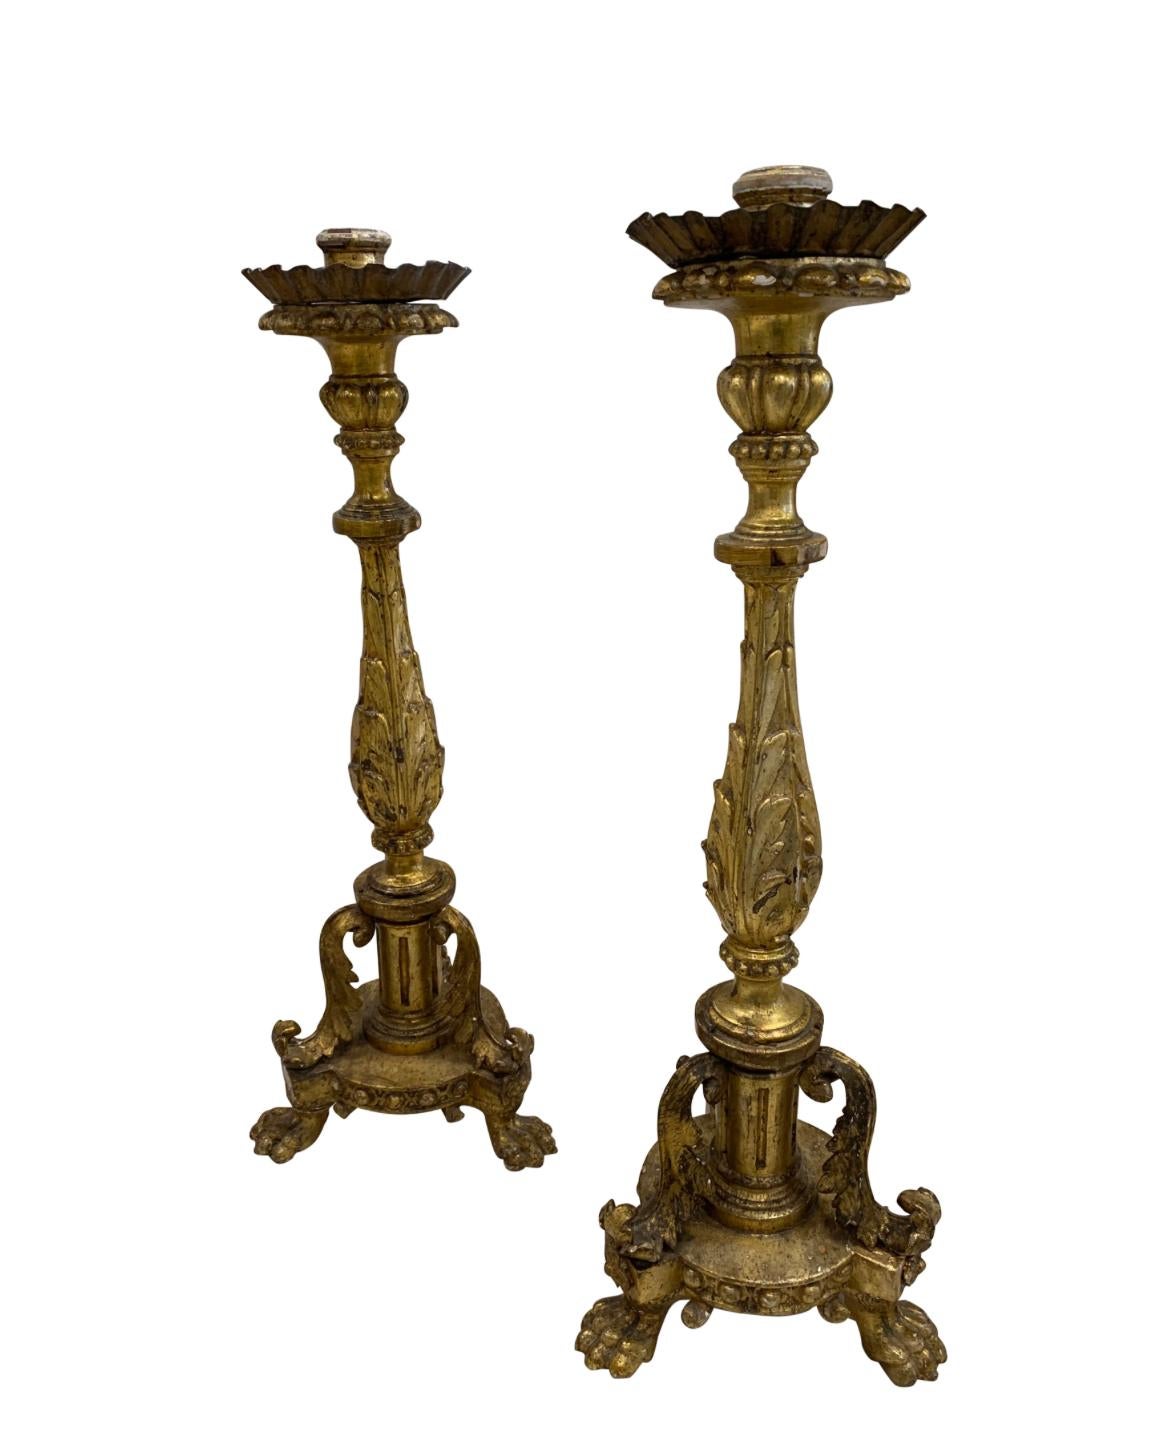 Hand-Crafted 19th Century Italian Gold Gilt Candlesticks For Sale